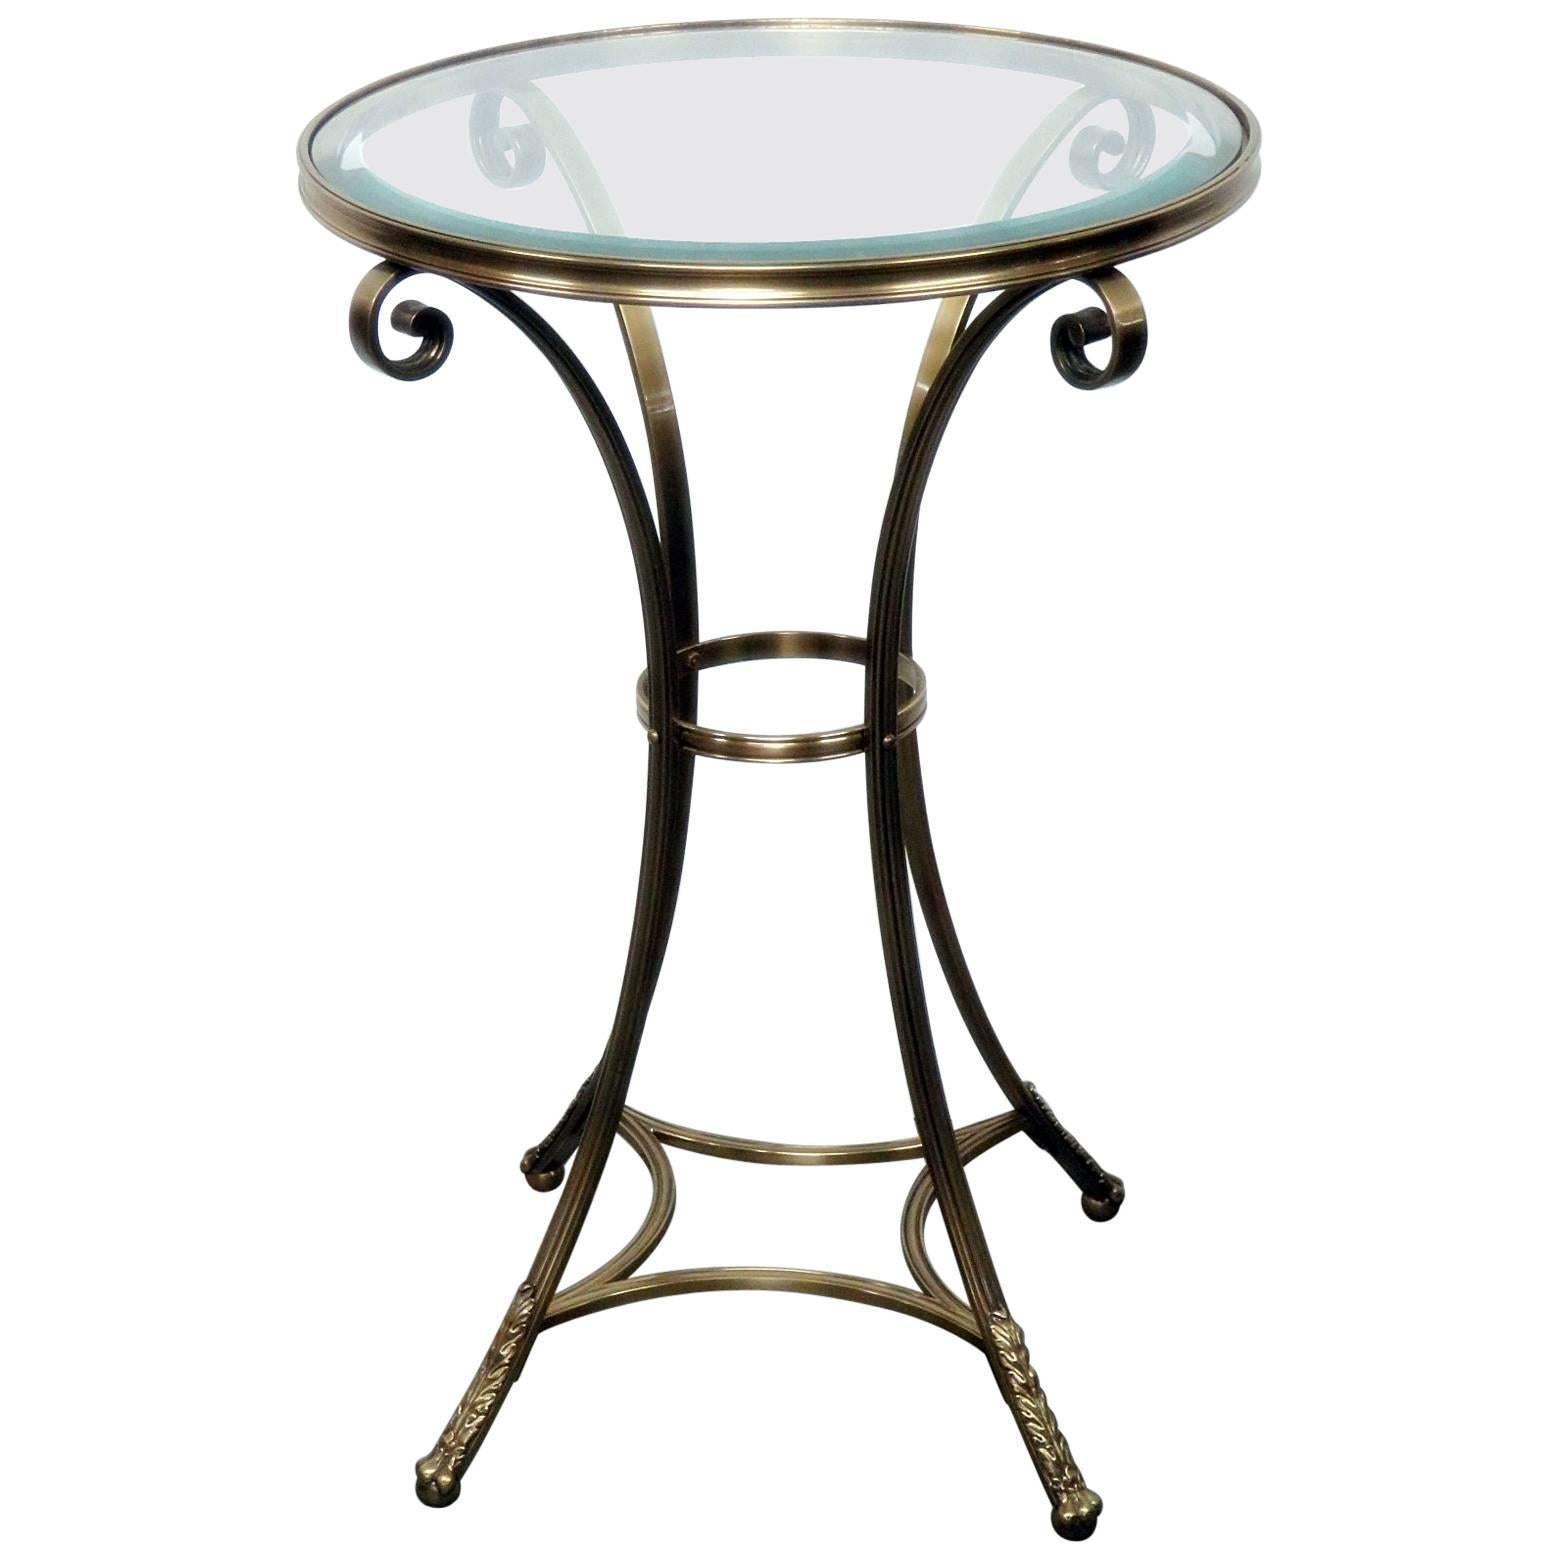 Single Jansen Style Brass and Glass Top Gueridon End Table